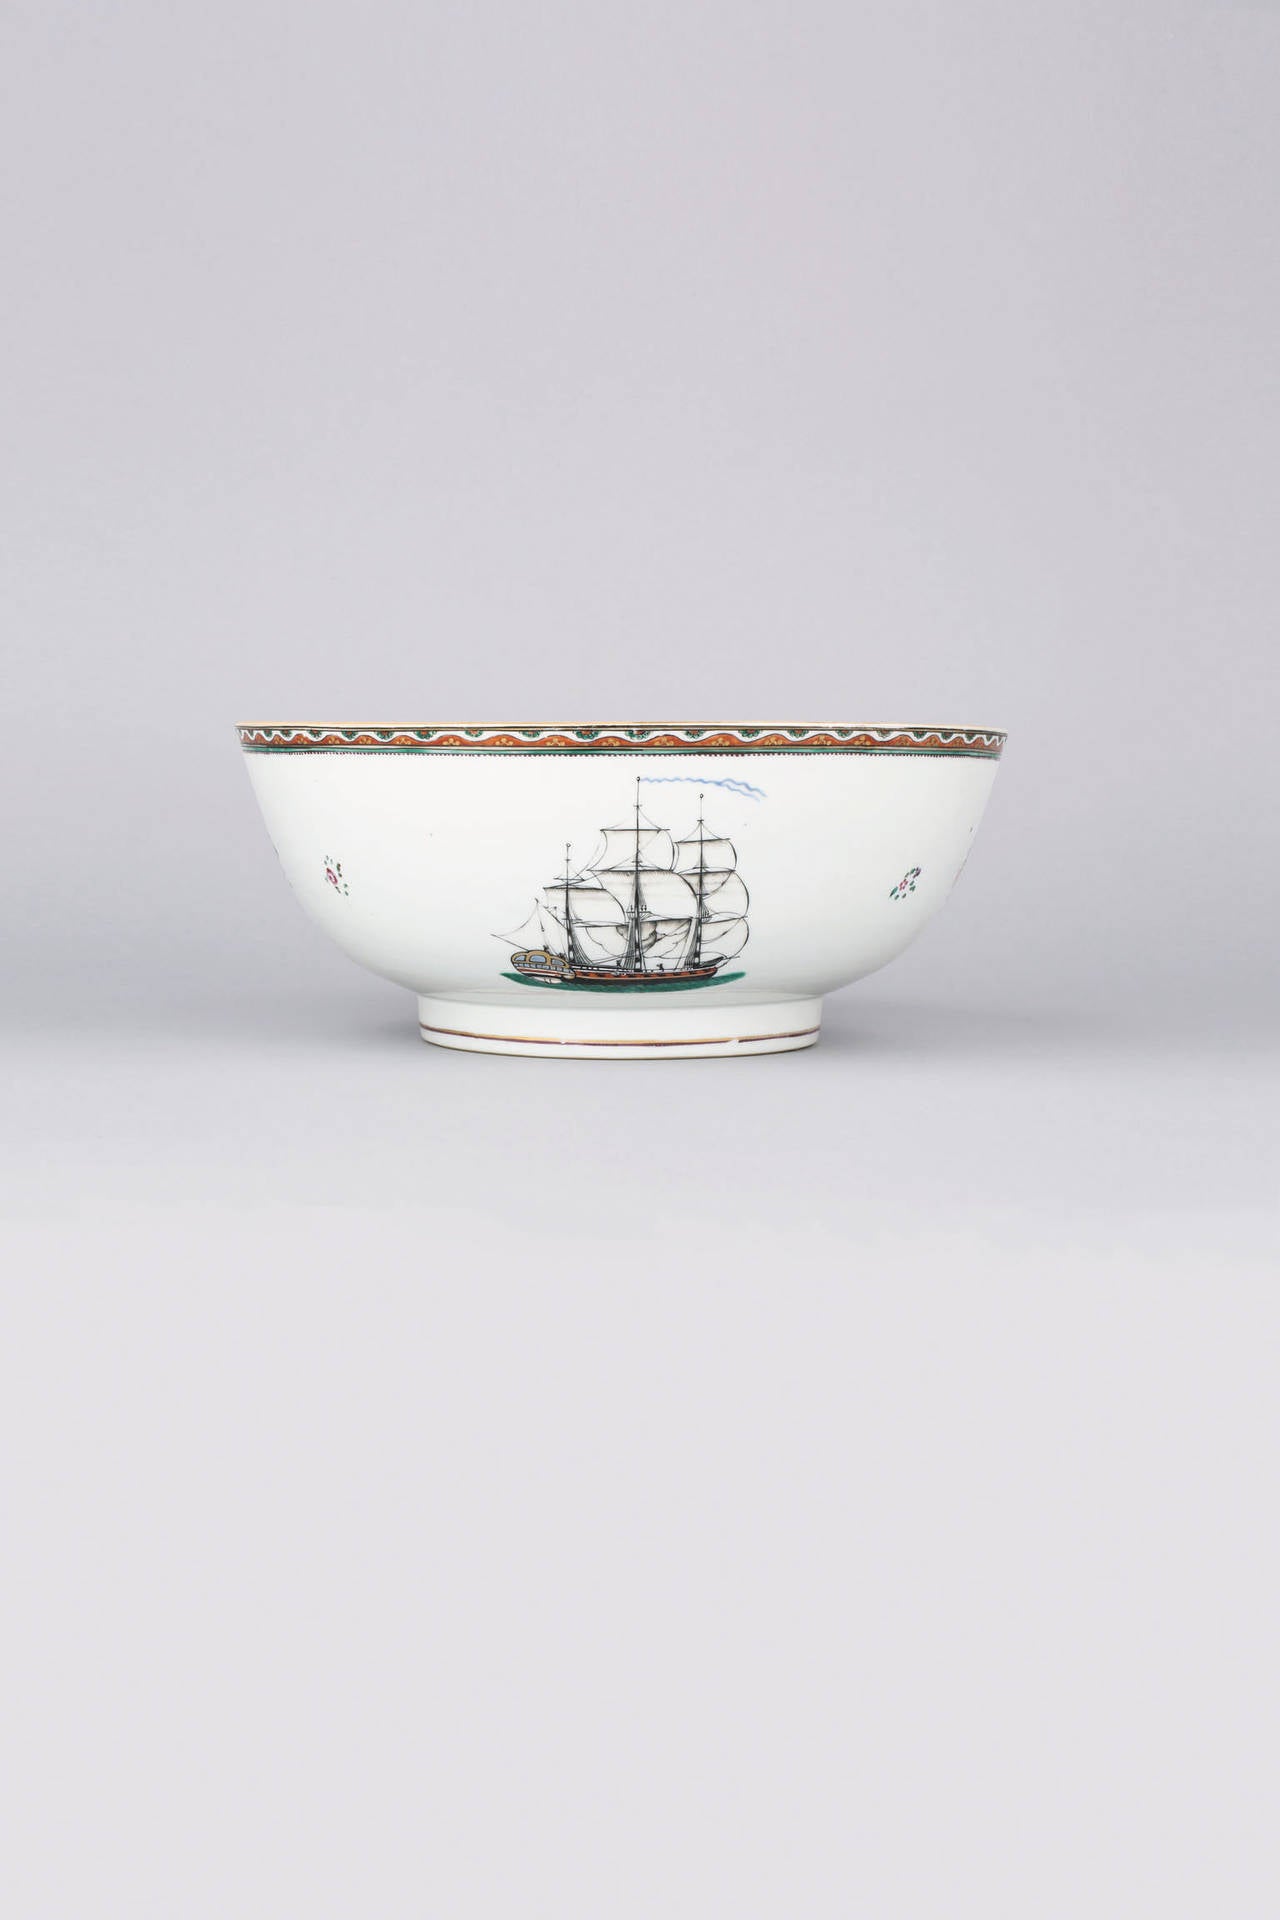 Famille rose punch bowl, painted with a Hudson Bay Company factory, probably at York, Canada, with an English blue ensign and typical stained glass windows, pitched roof and chimneys, in blue, pale turquoise, ruby and white enamels heightened with